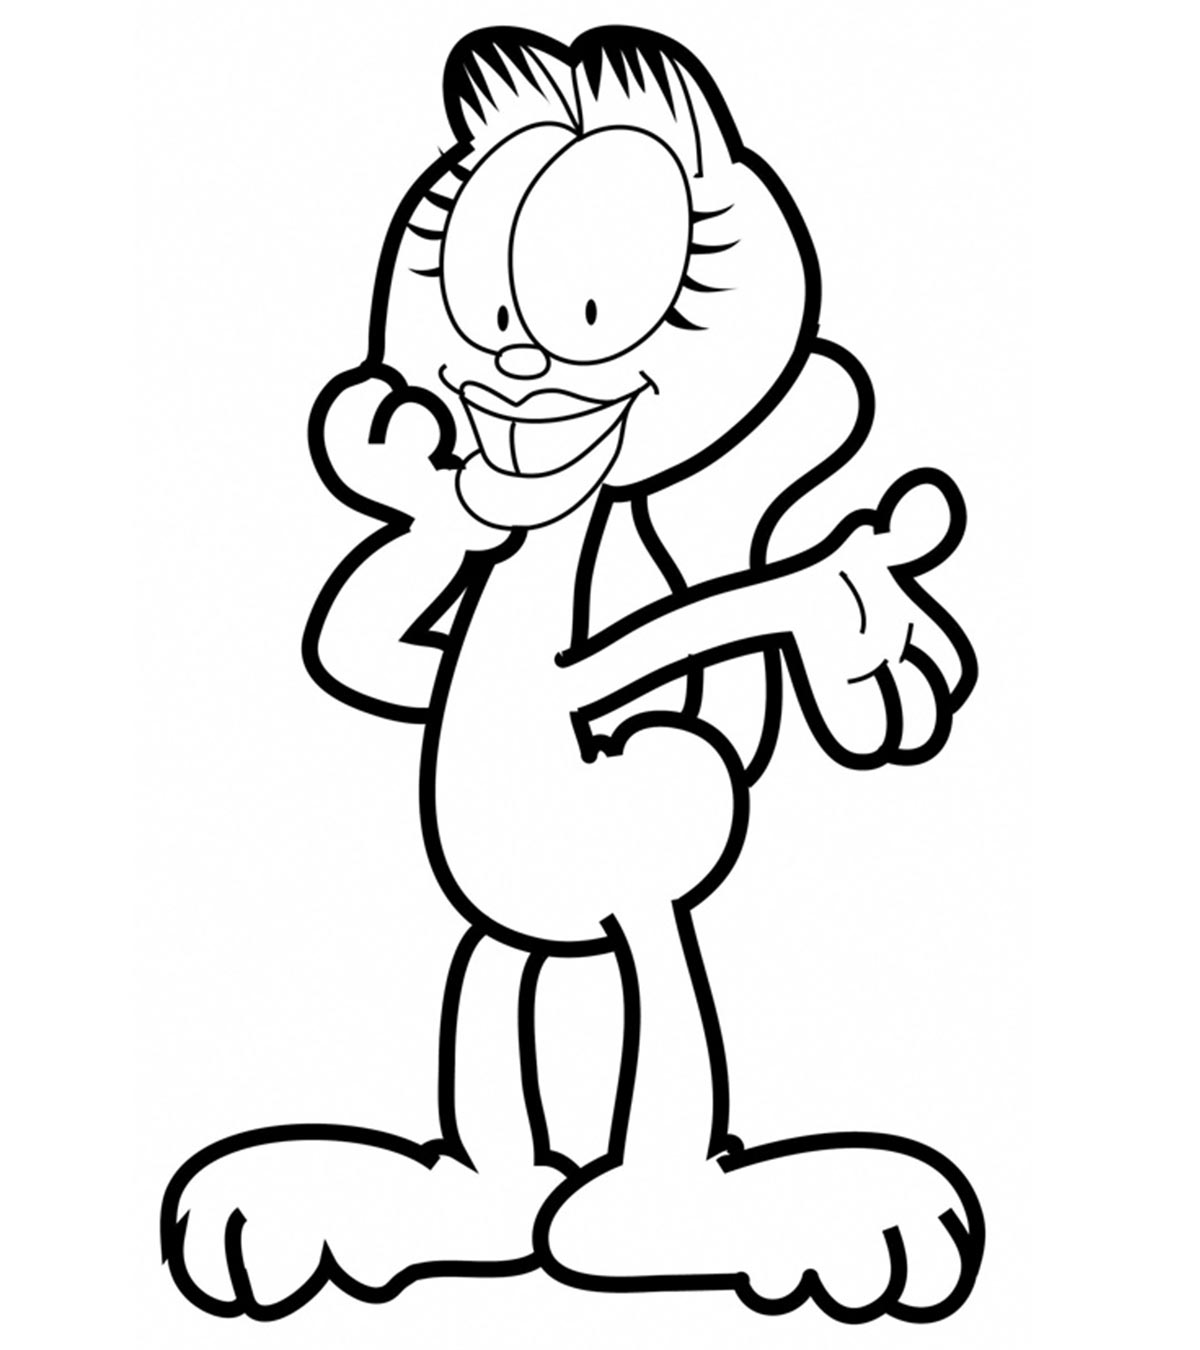 Top 10 Garfield Coloring Pages For Your Toddler_image